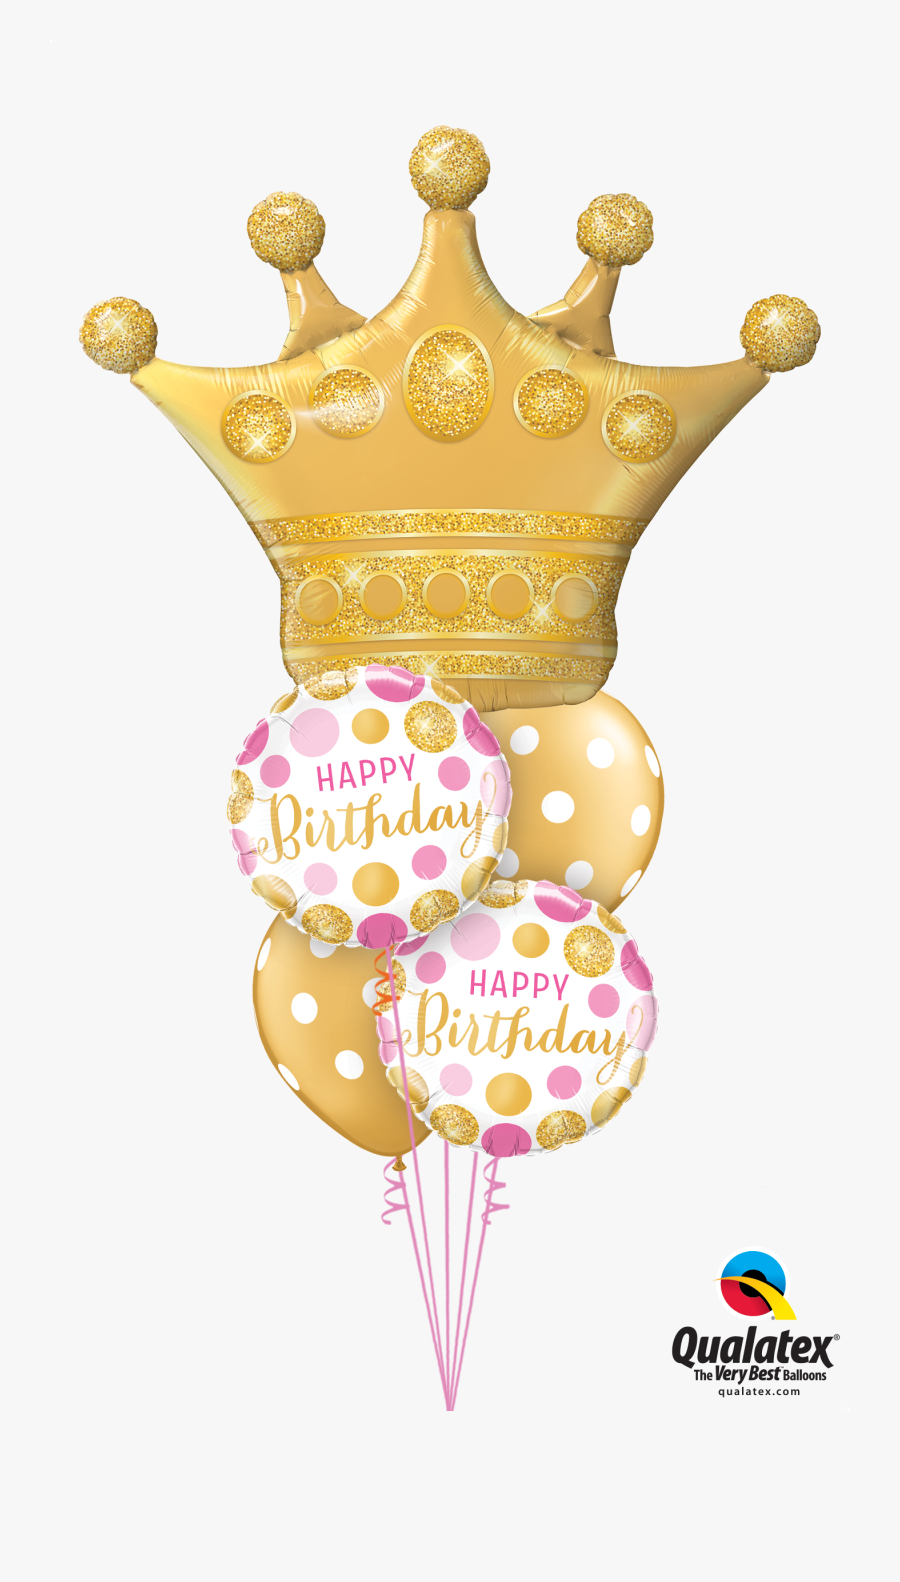 Birthday Golden Crown At London Helium - Crown Balloons, Transparent Clipart